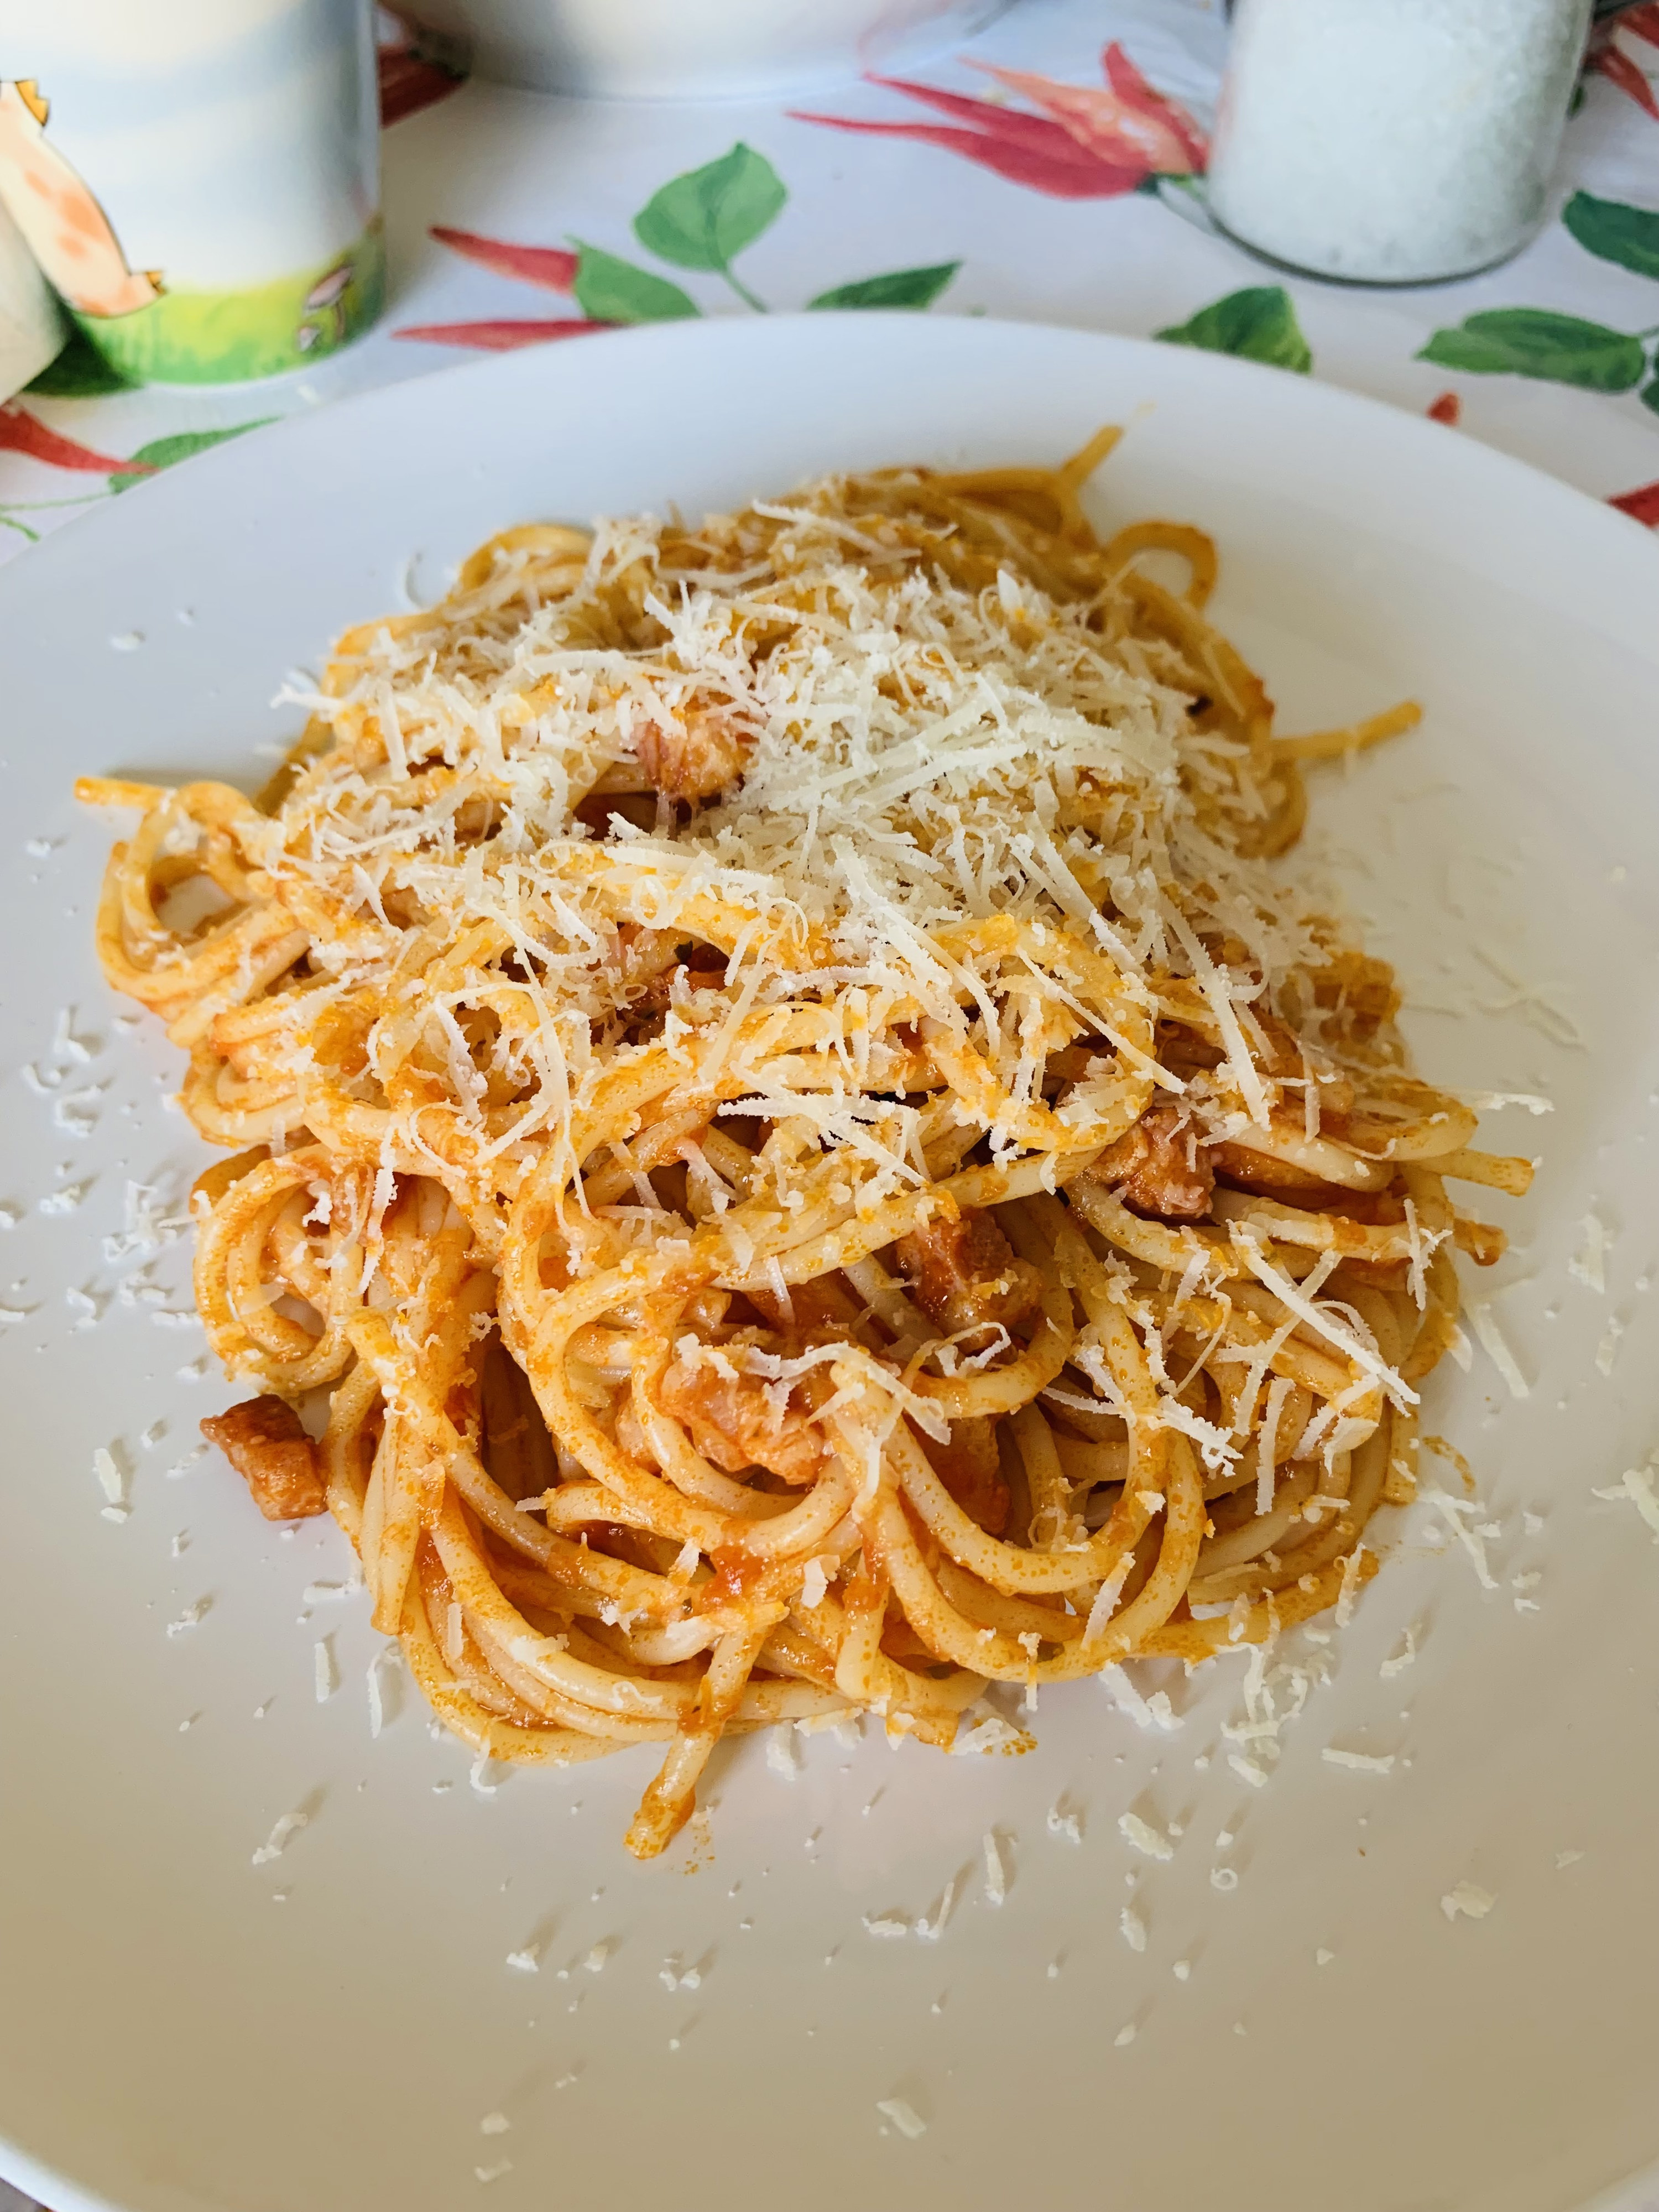 spaghetti on a plate with parmesan cheese and a tomato sauce